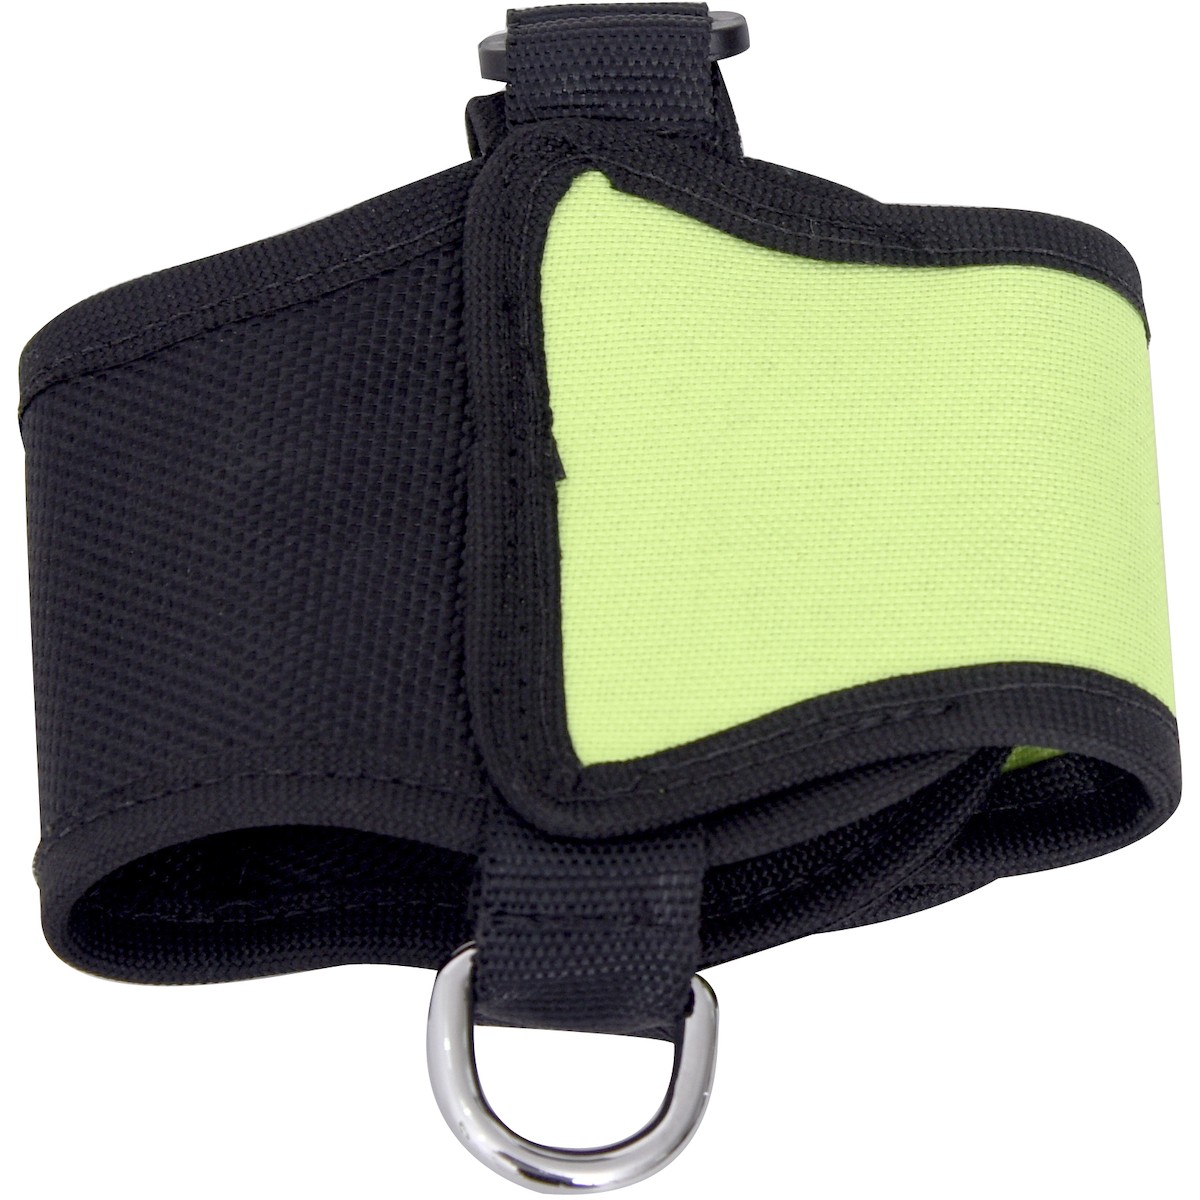 PIP® Measuring Tape Pouch - 2 lbs. maximum load limit  (#533-300301)